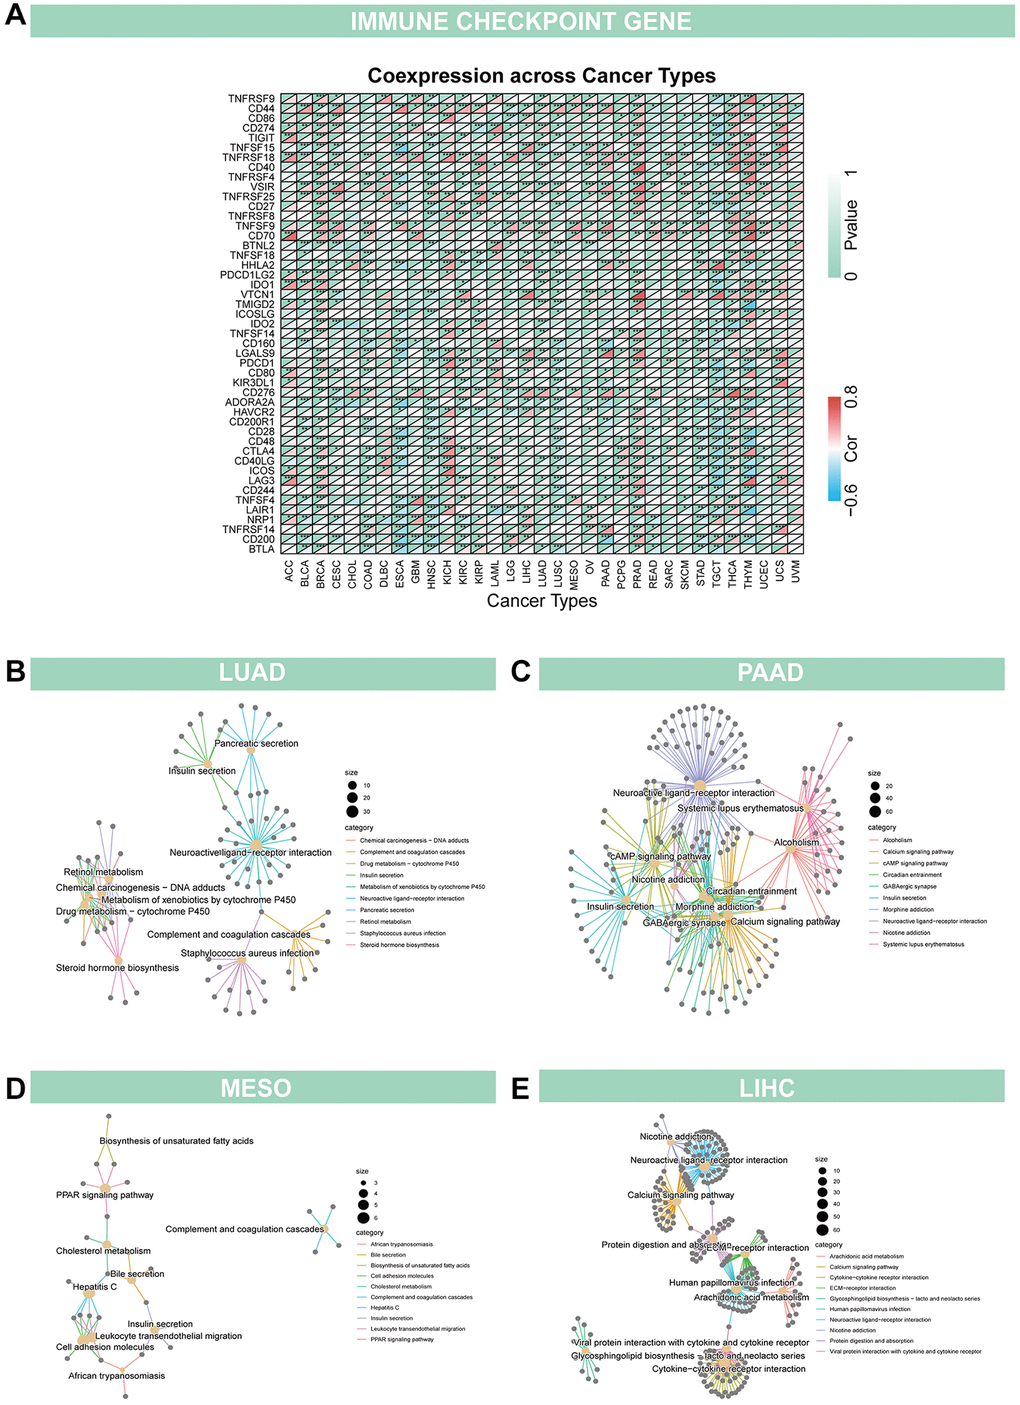 Relationship of GJB3 with immune checkpoint and biological function in cancer (A) GJB3 is related to immune checkpoint-related genes in diverse tumors. (B–E) The KEGG study investigates the biological functions of four cancers, LUAD (B), PAAD (C), MESO (D) and LIHC (E).